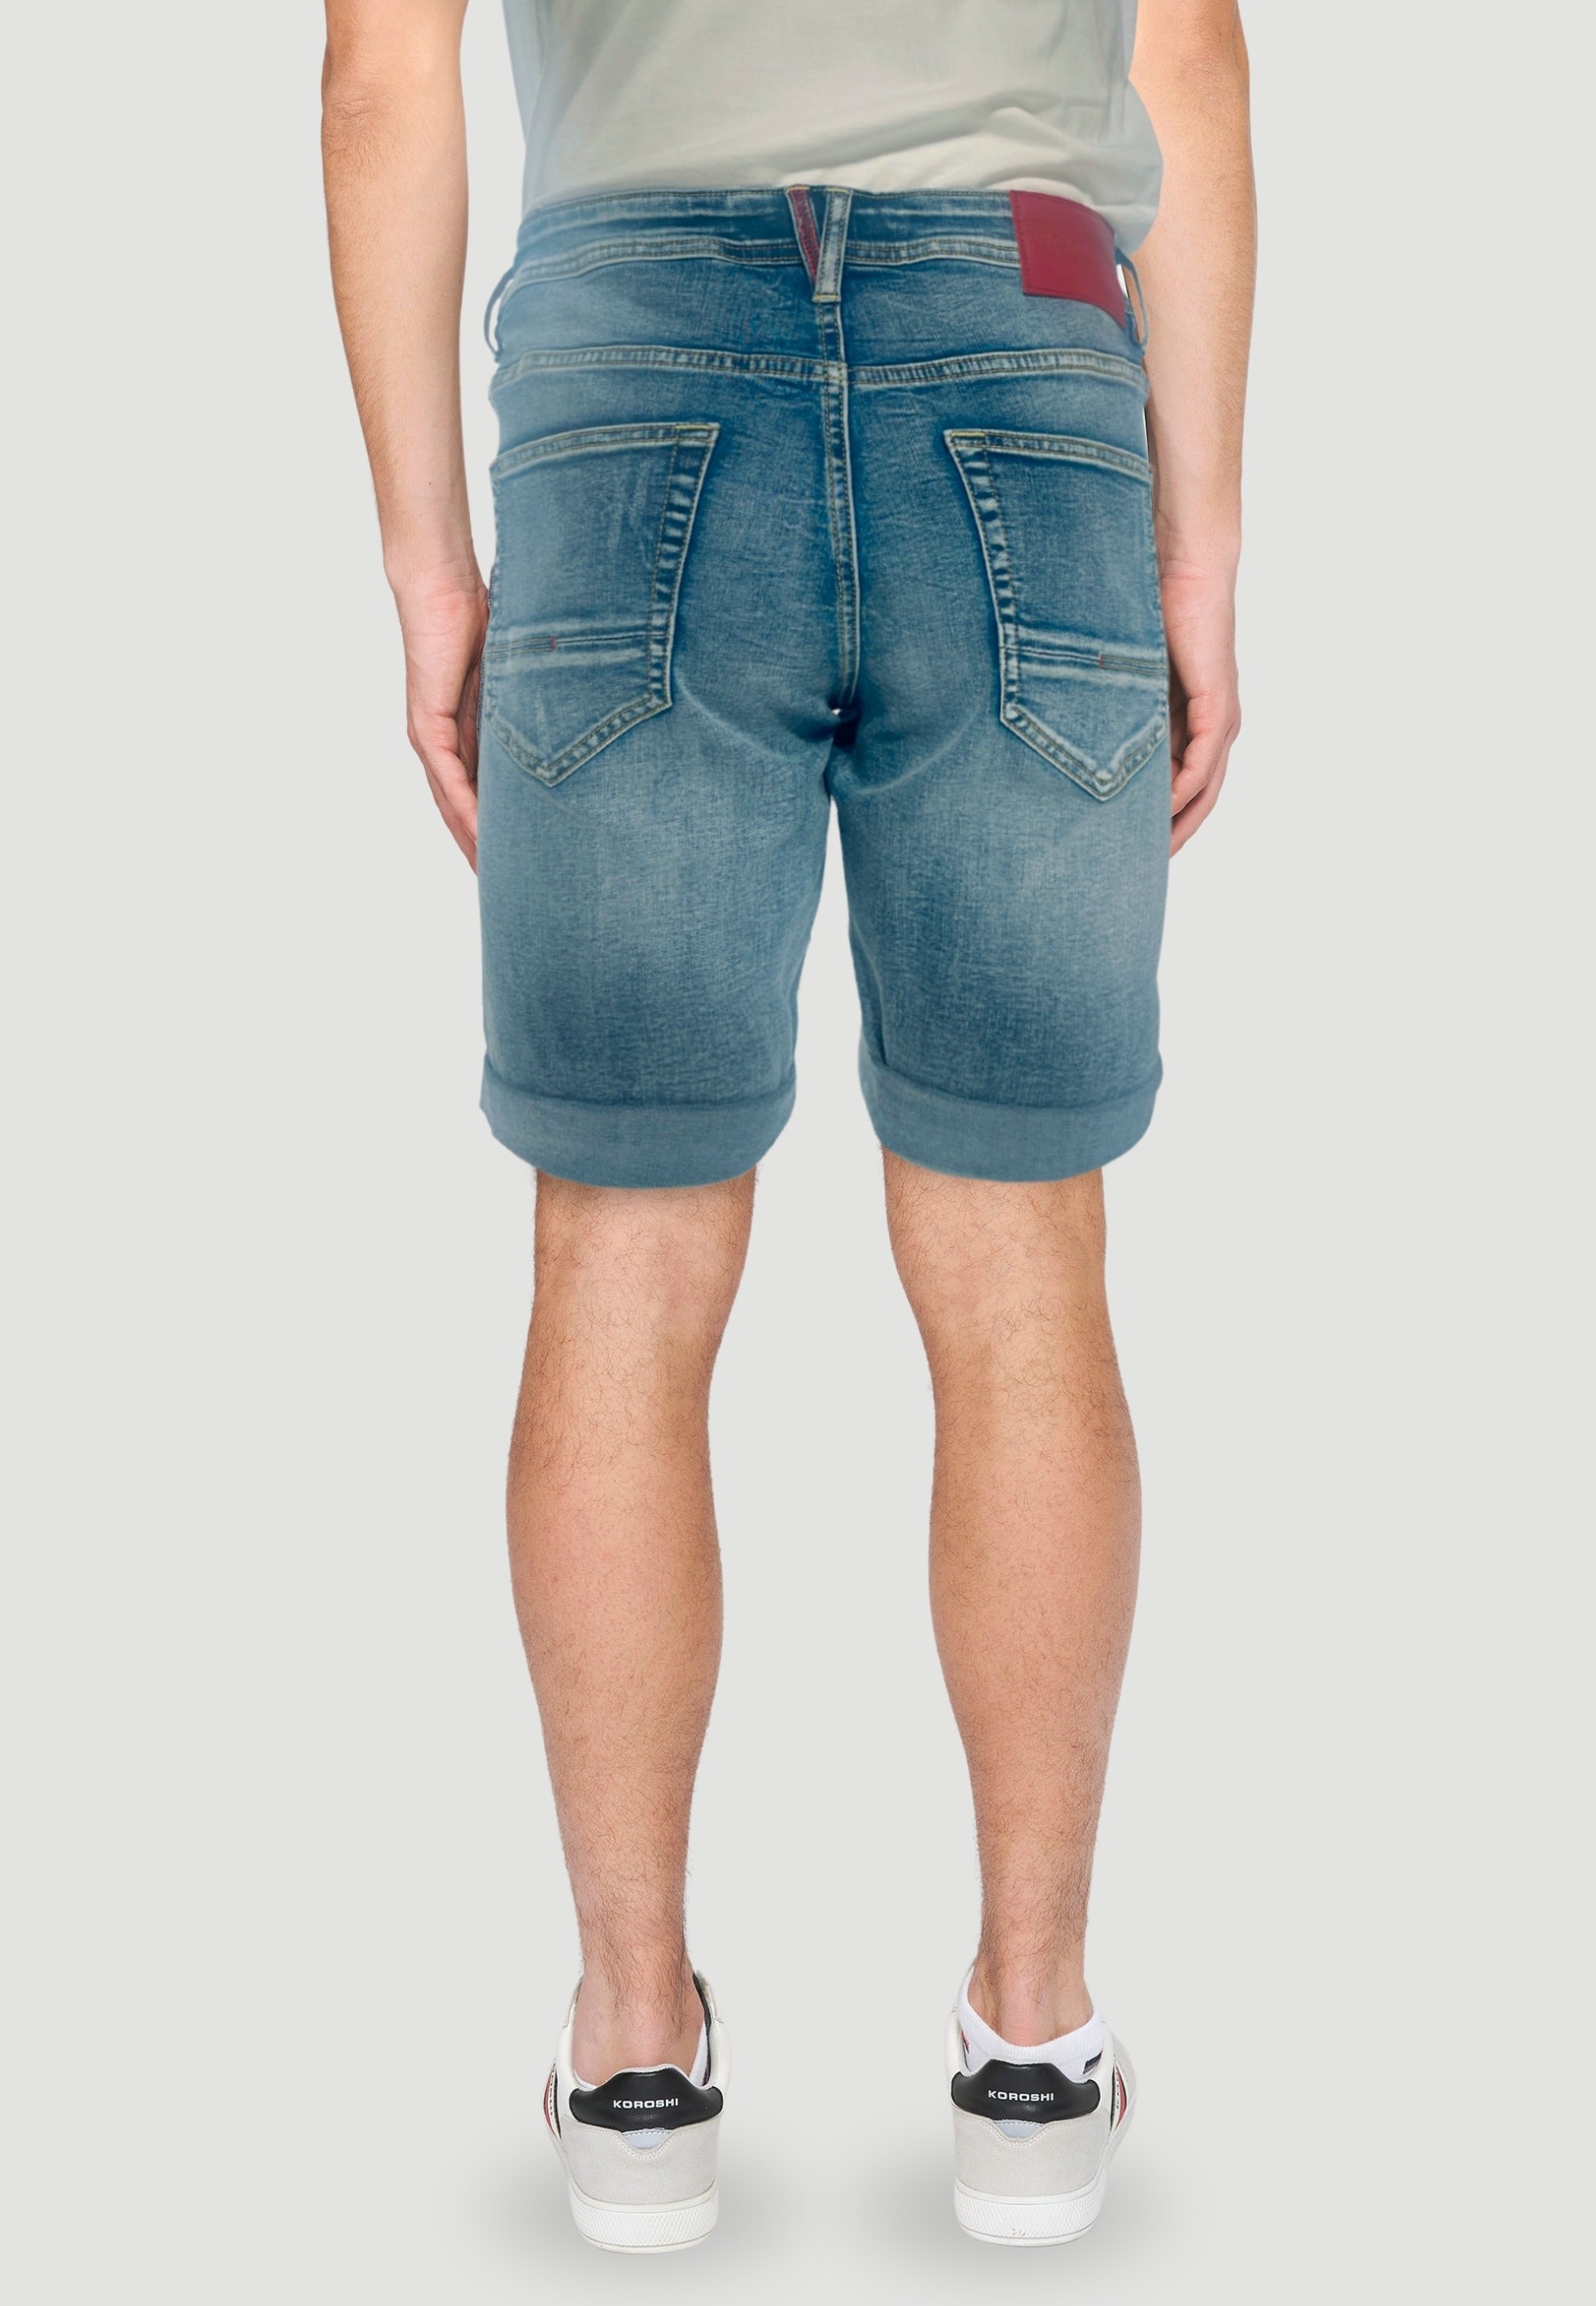 Denim Bermuda shorts with turn-up finish and front zipper and button closure with five pockets, one pocket pocket, in Blue for Men 4